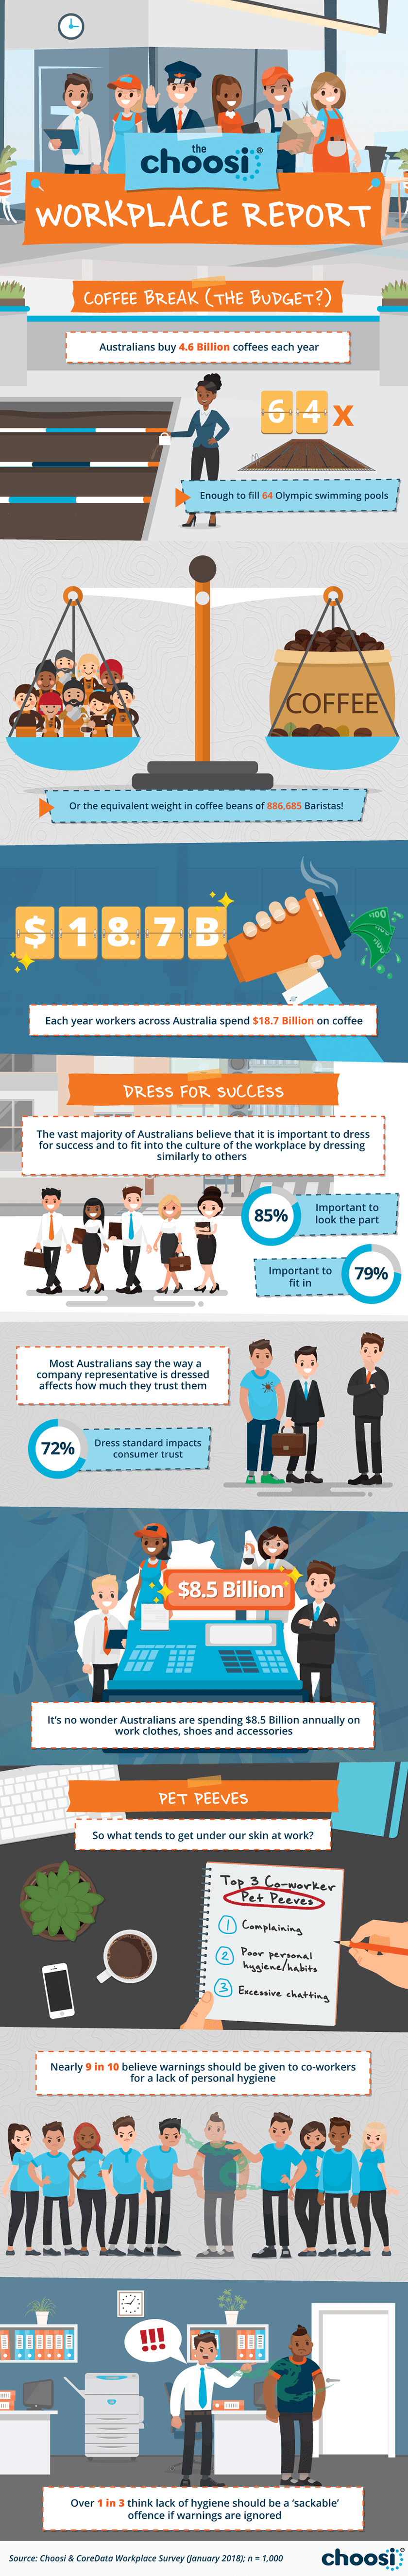 An infographic of the Choosi workplace report